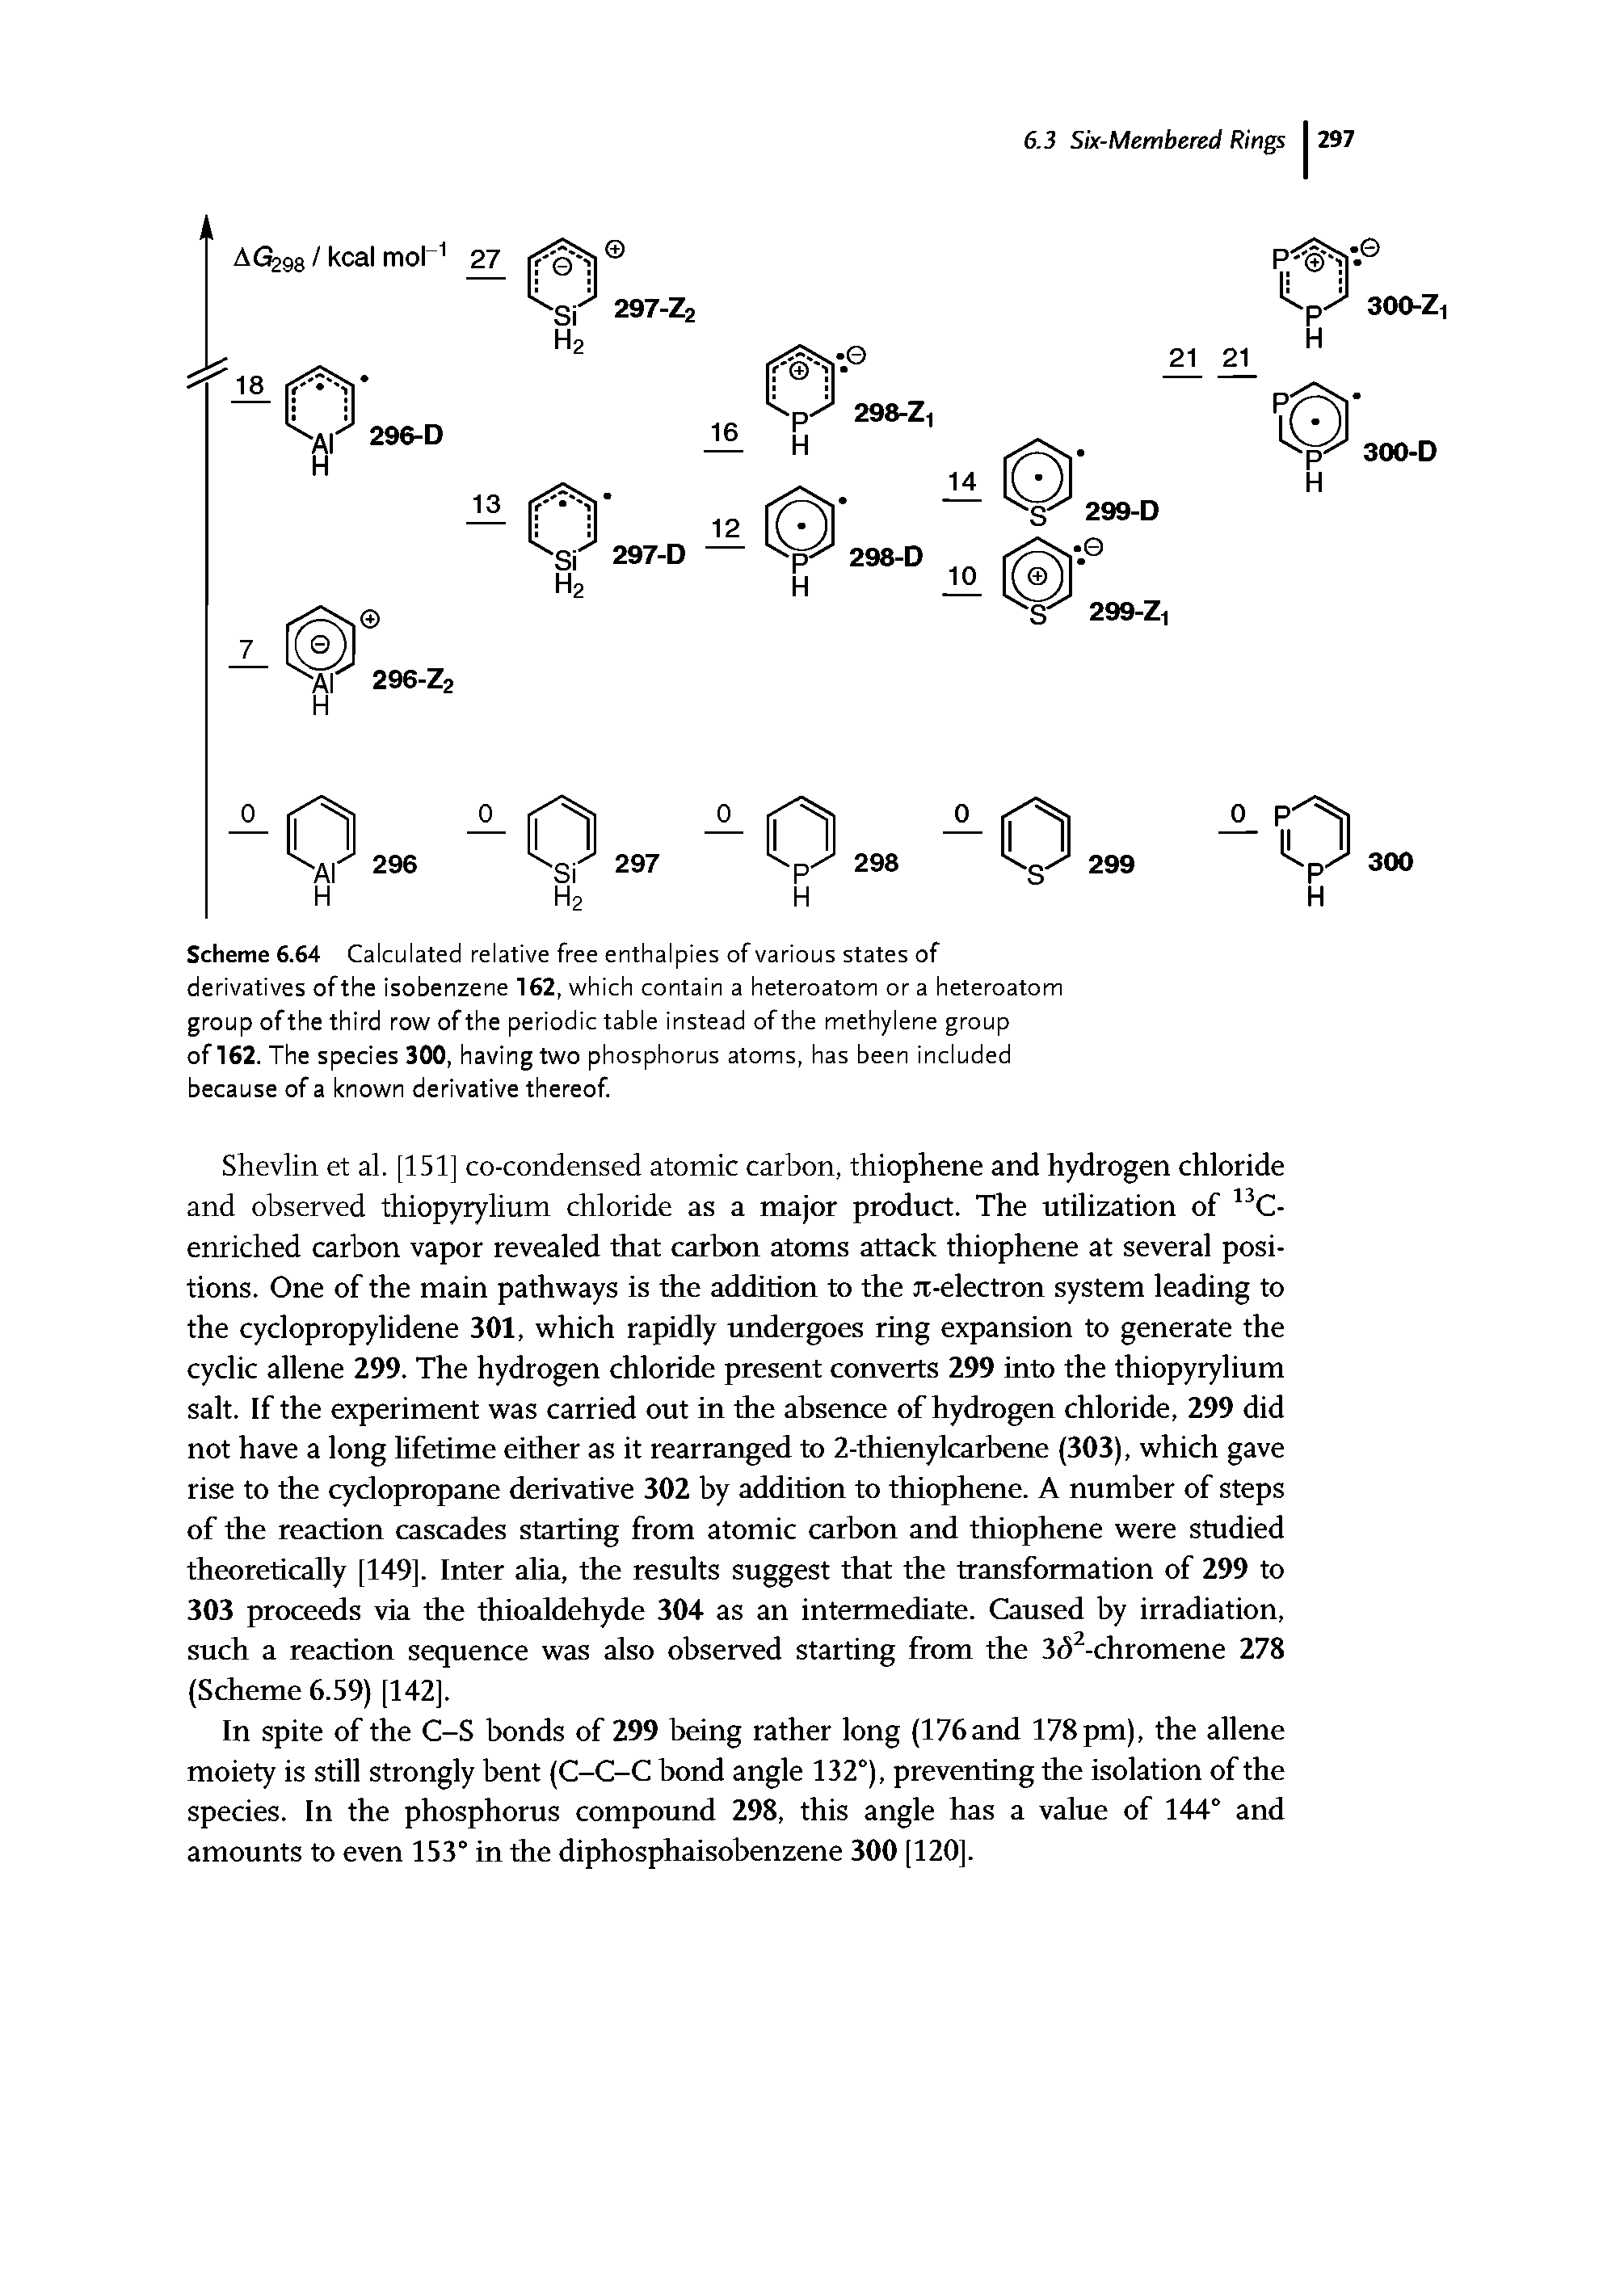 Scheme 6.64 Calculated relative free enthalpies of various states of derivatives ofthe isobenzene 162, which contain a heteroatom or a heteroatom group of the third row of the periodic table instead of the methylene group of 162. The species 300, having two phosphorus atoms, has been included because of a known derivative thereof.